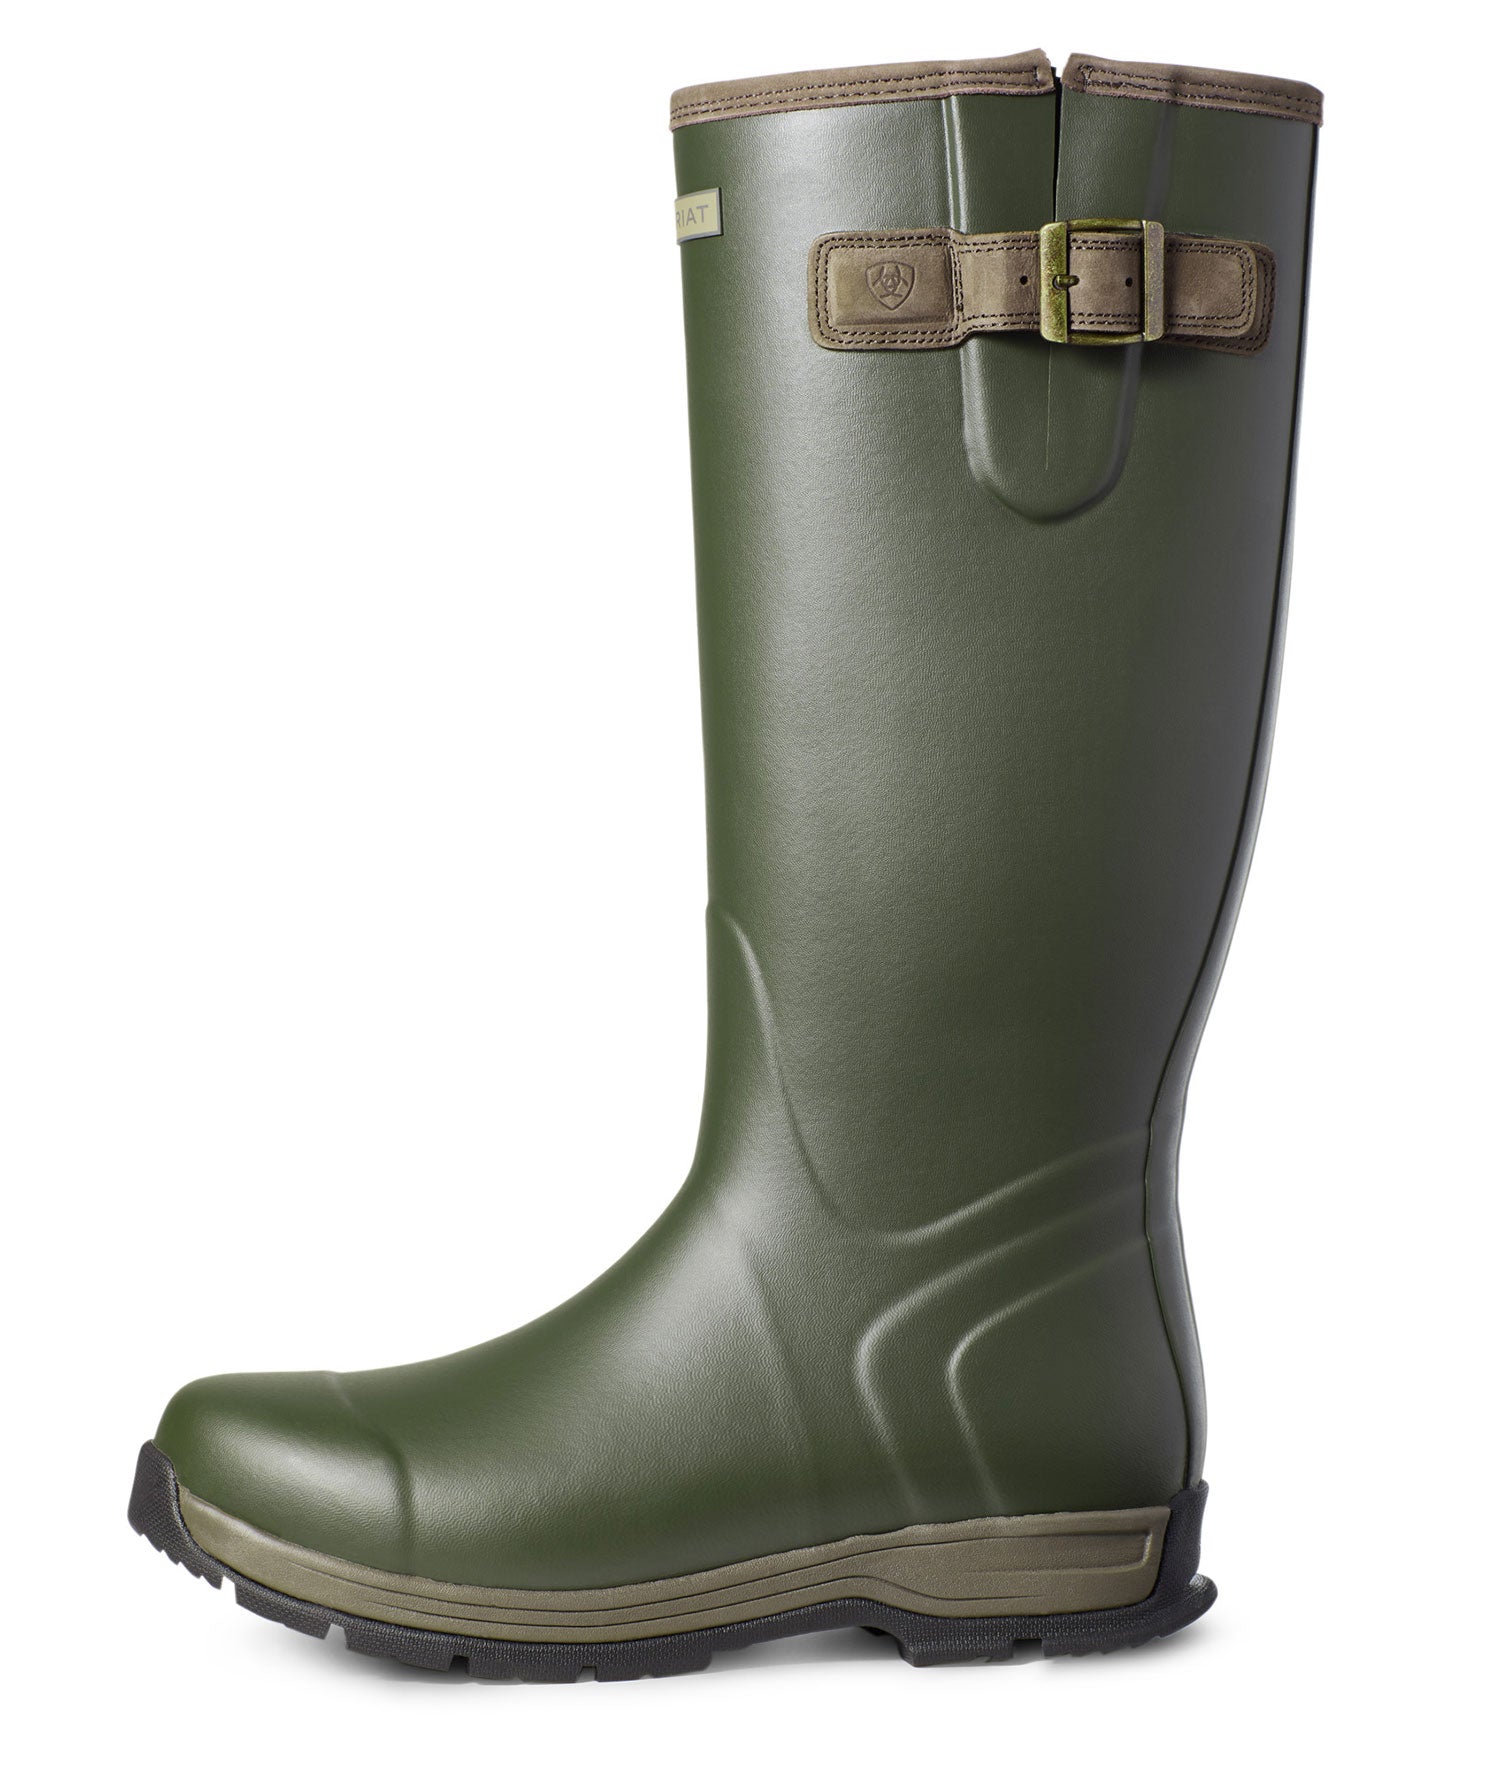 Ariat Men's Burford Insulated Wellington Boots